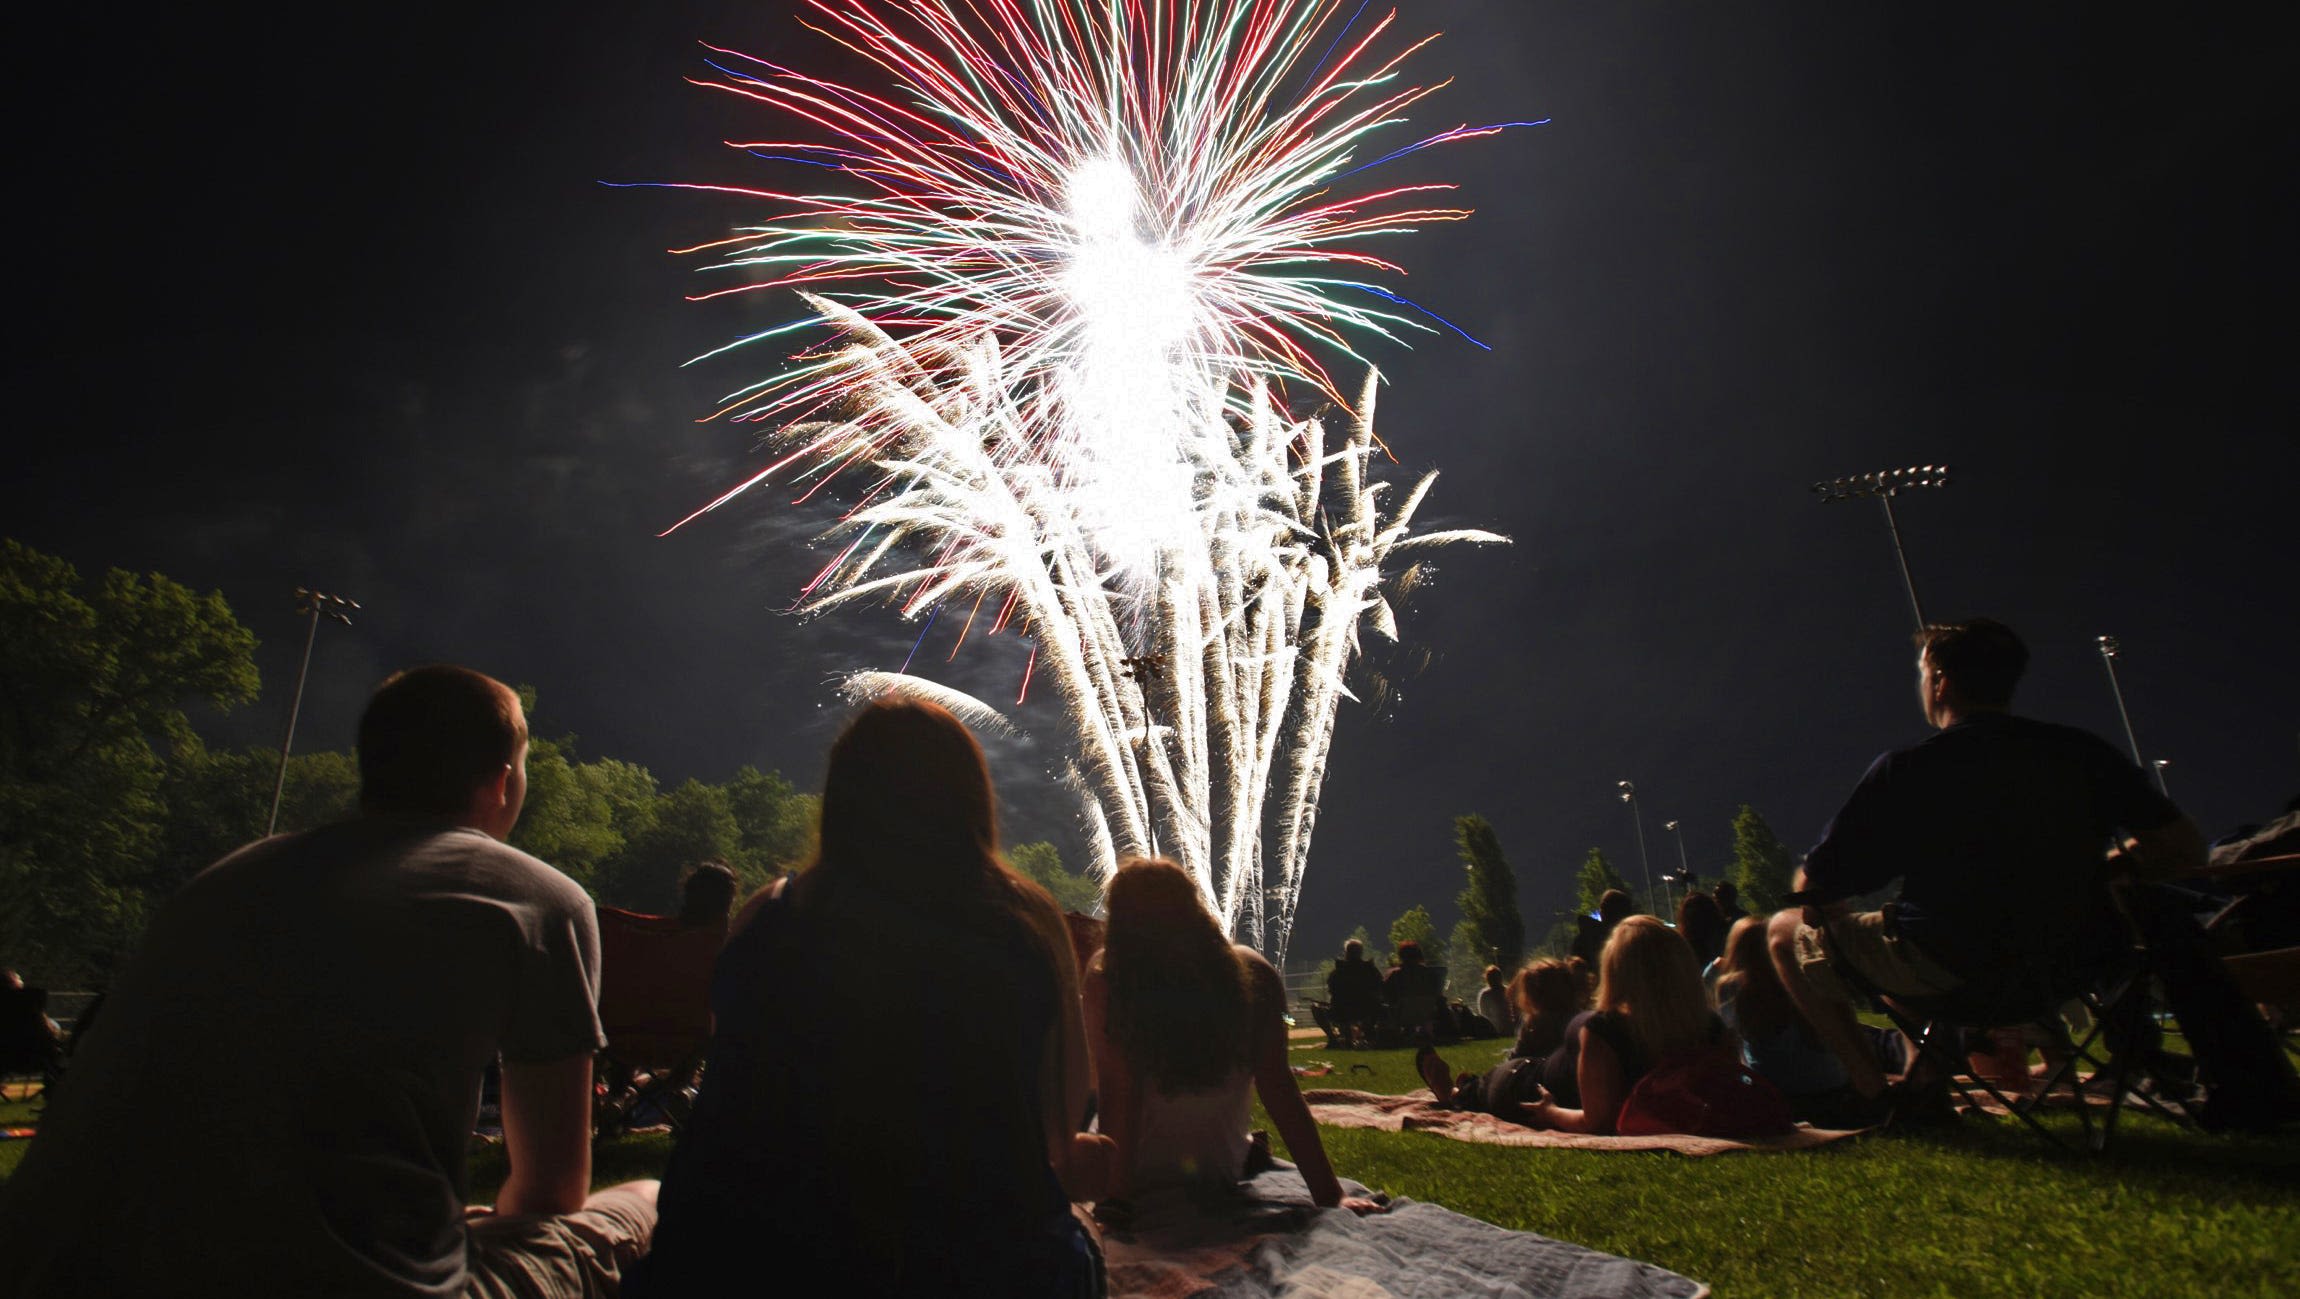 Storms postpone Paramus fireworks, food truck fest. Here's the new schedule